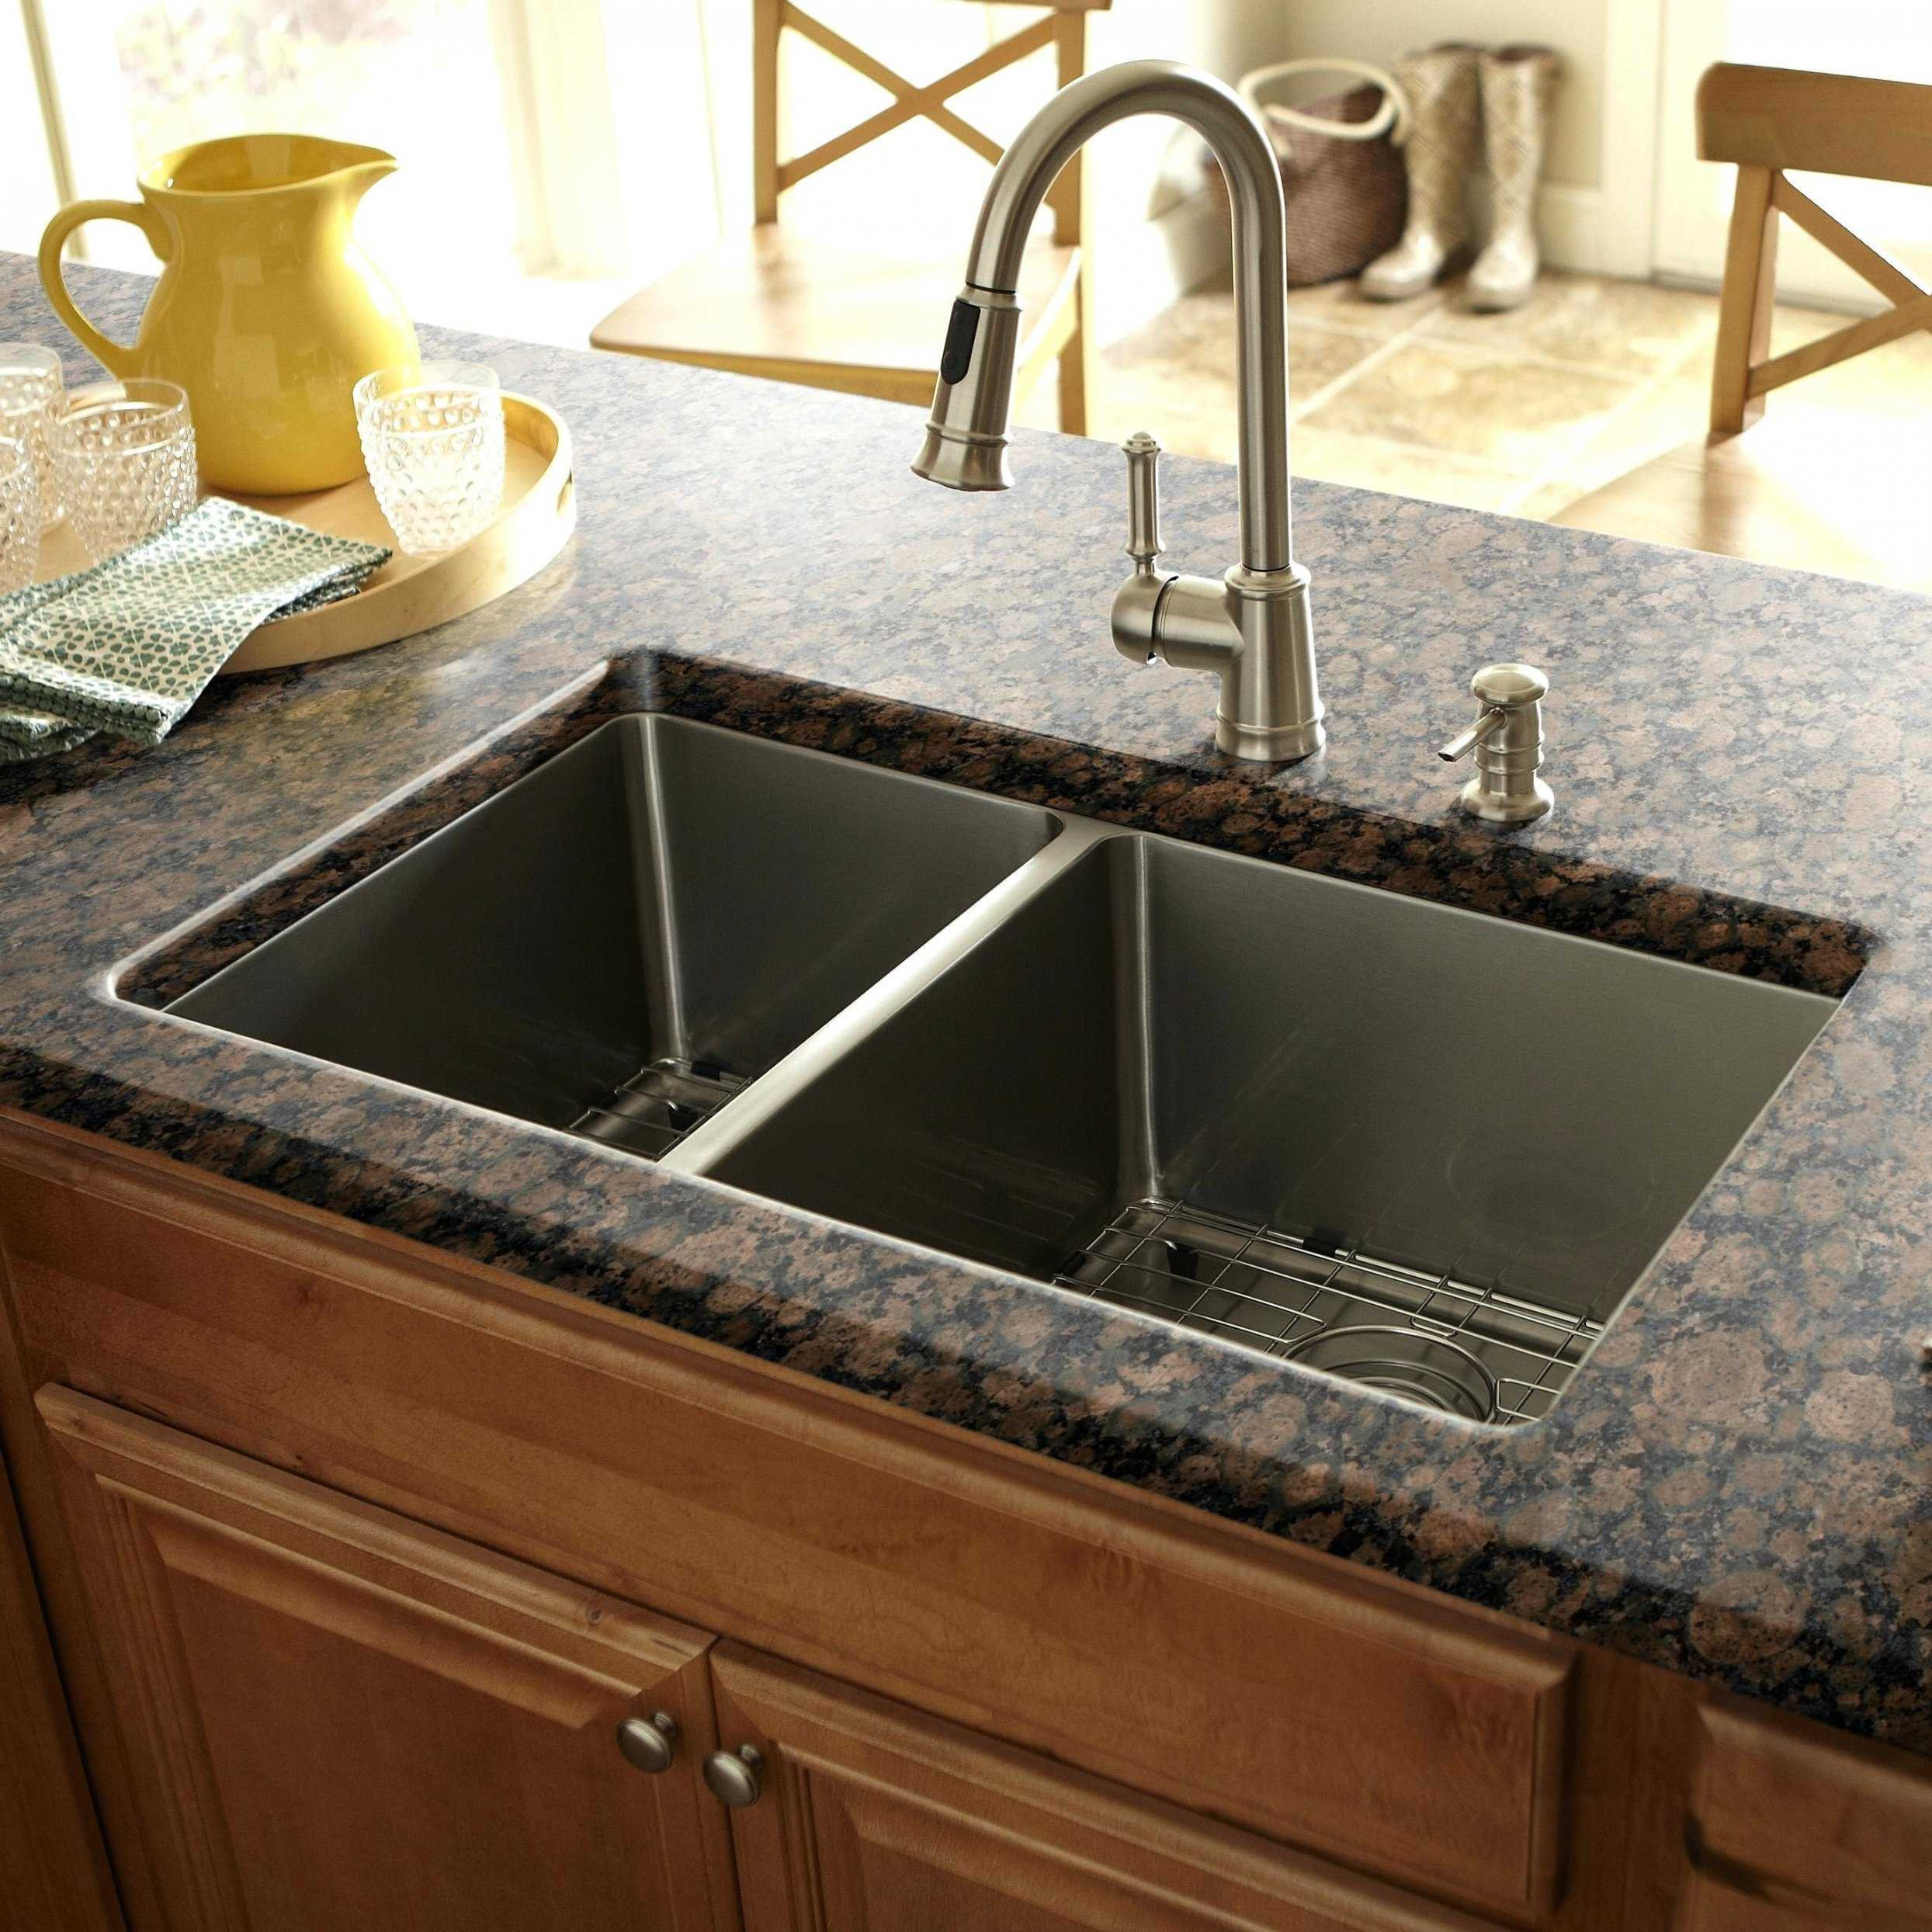 The Kitchen Sink 2018
 Kitchen Sink Types With Charming Drain Plumbing